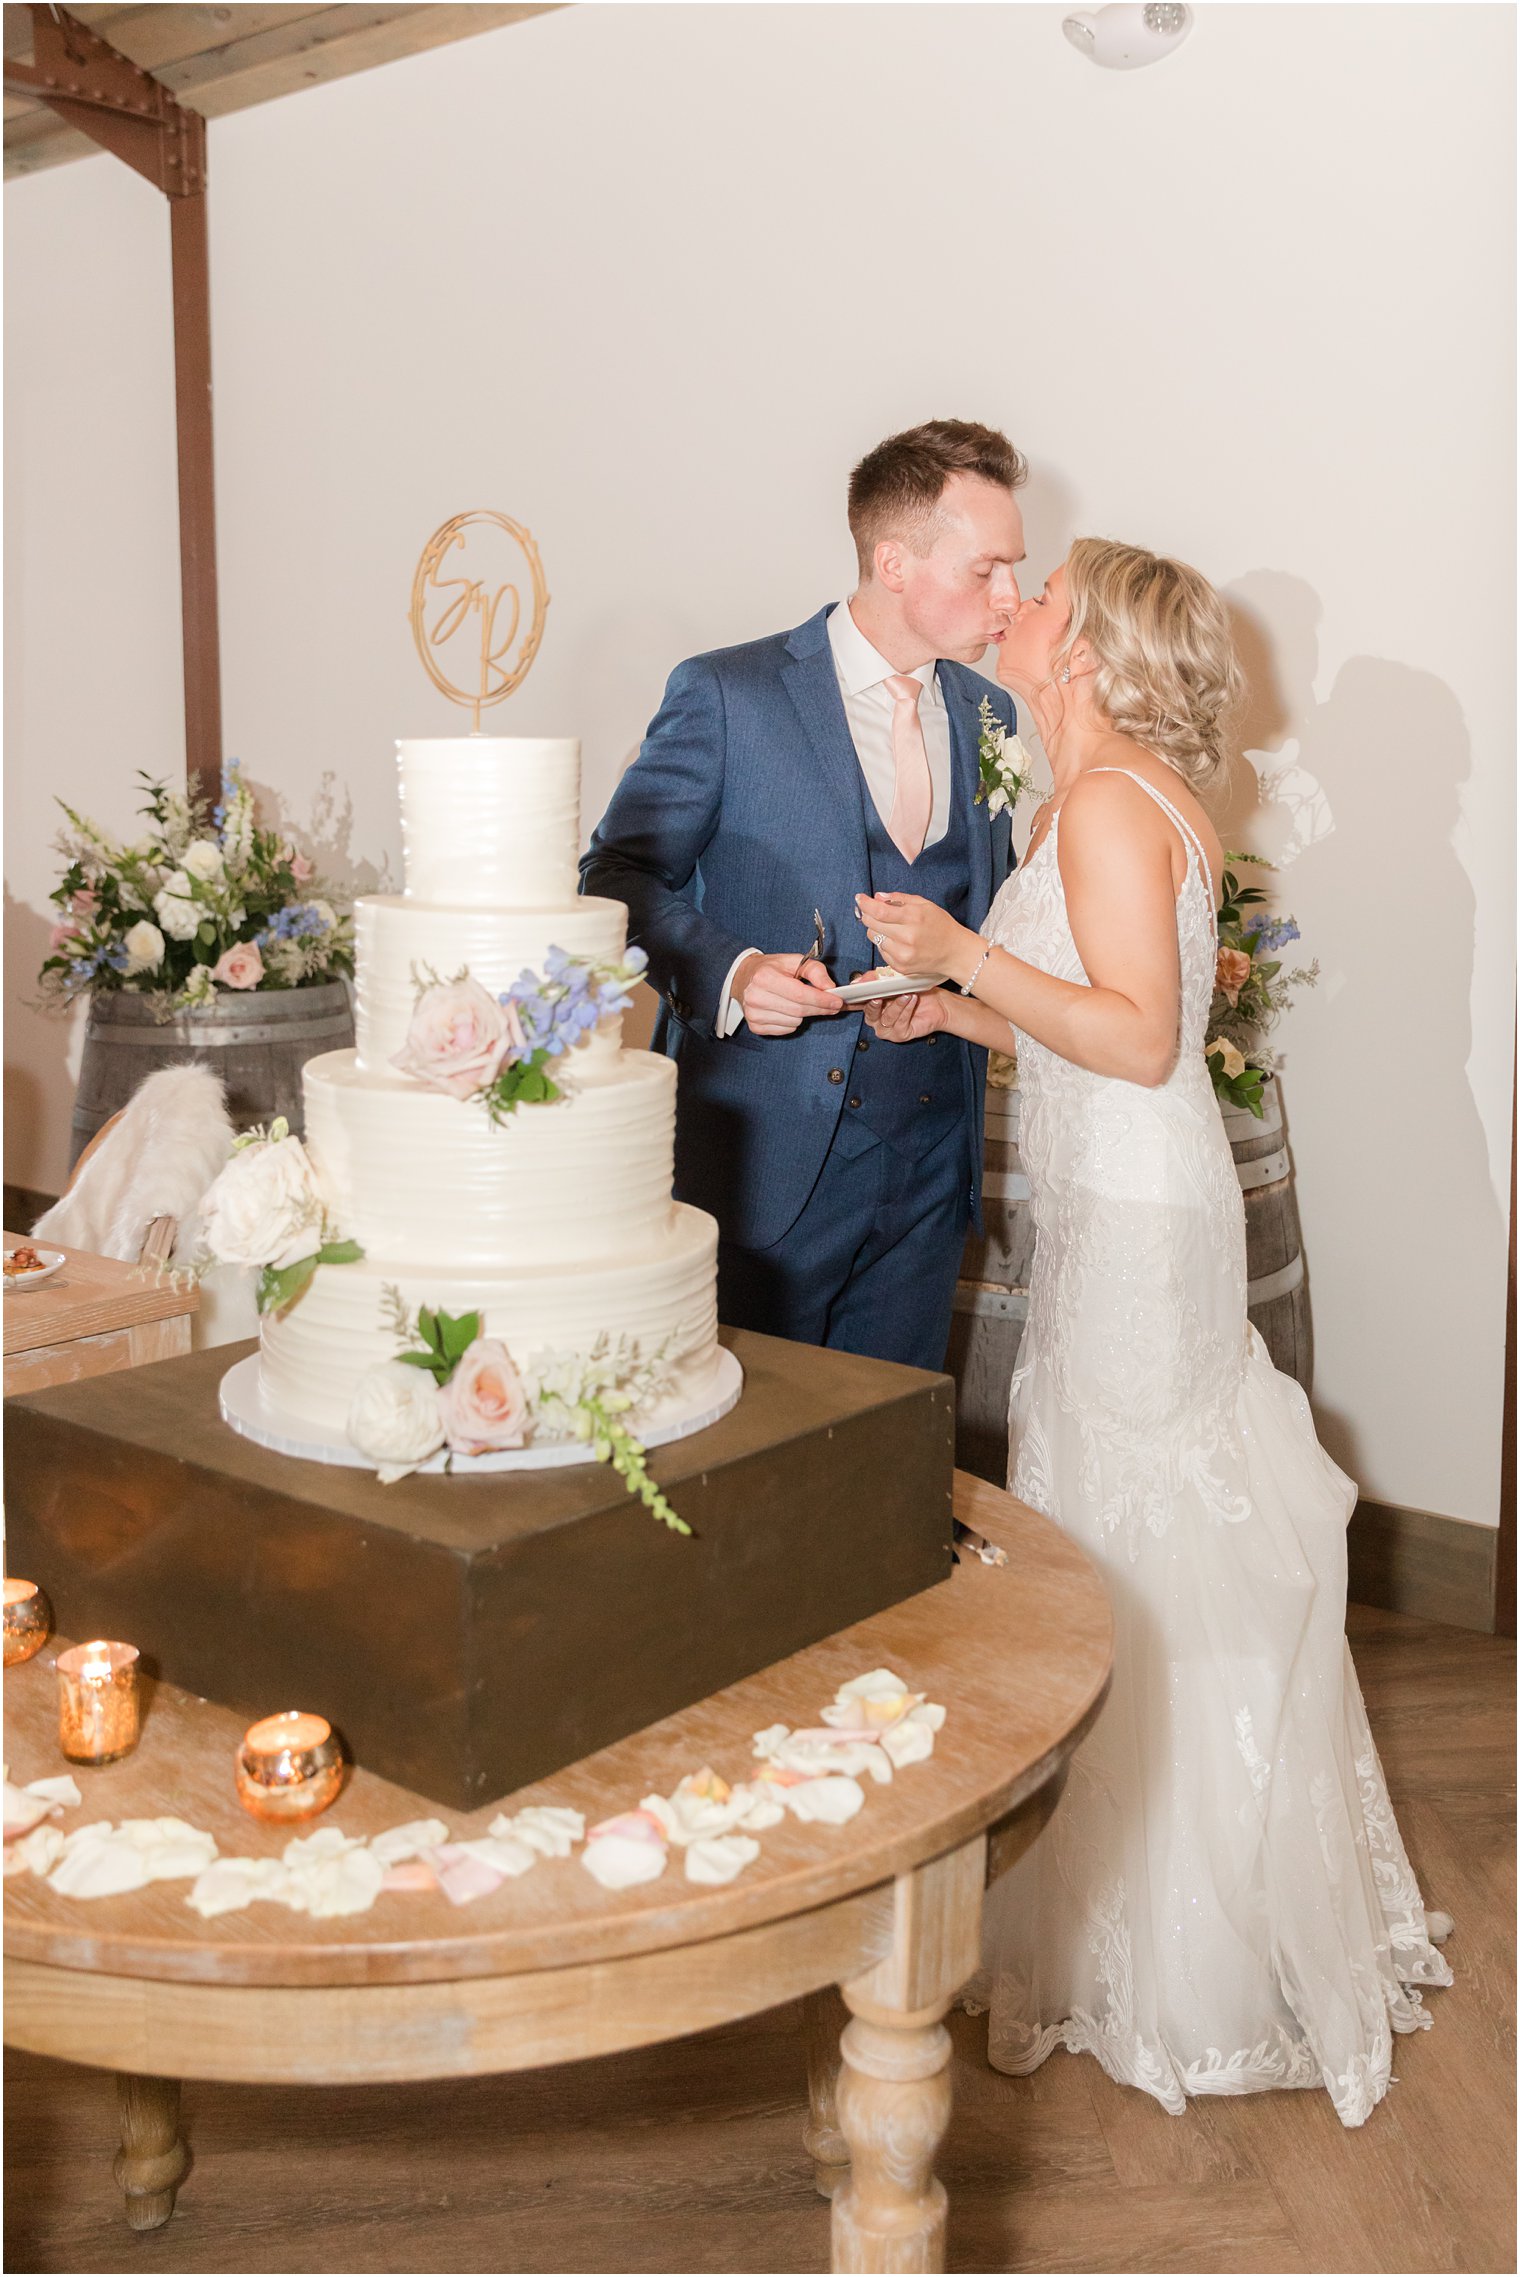 bride and groom cutting cake at rustic wedding reception in Vineyard Ballroom at Renault Winery South Jersey Venue in Egg Harbor Township NJ